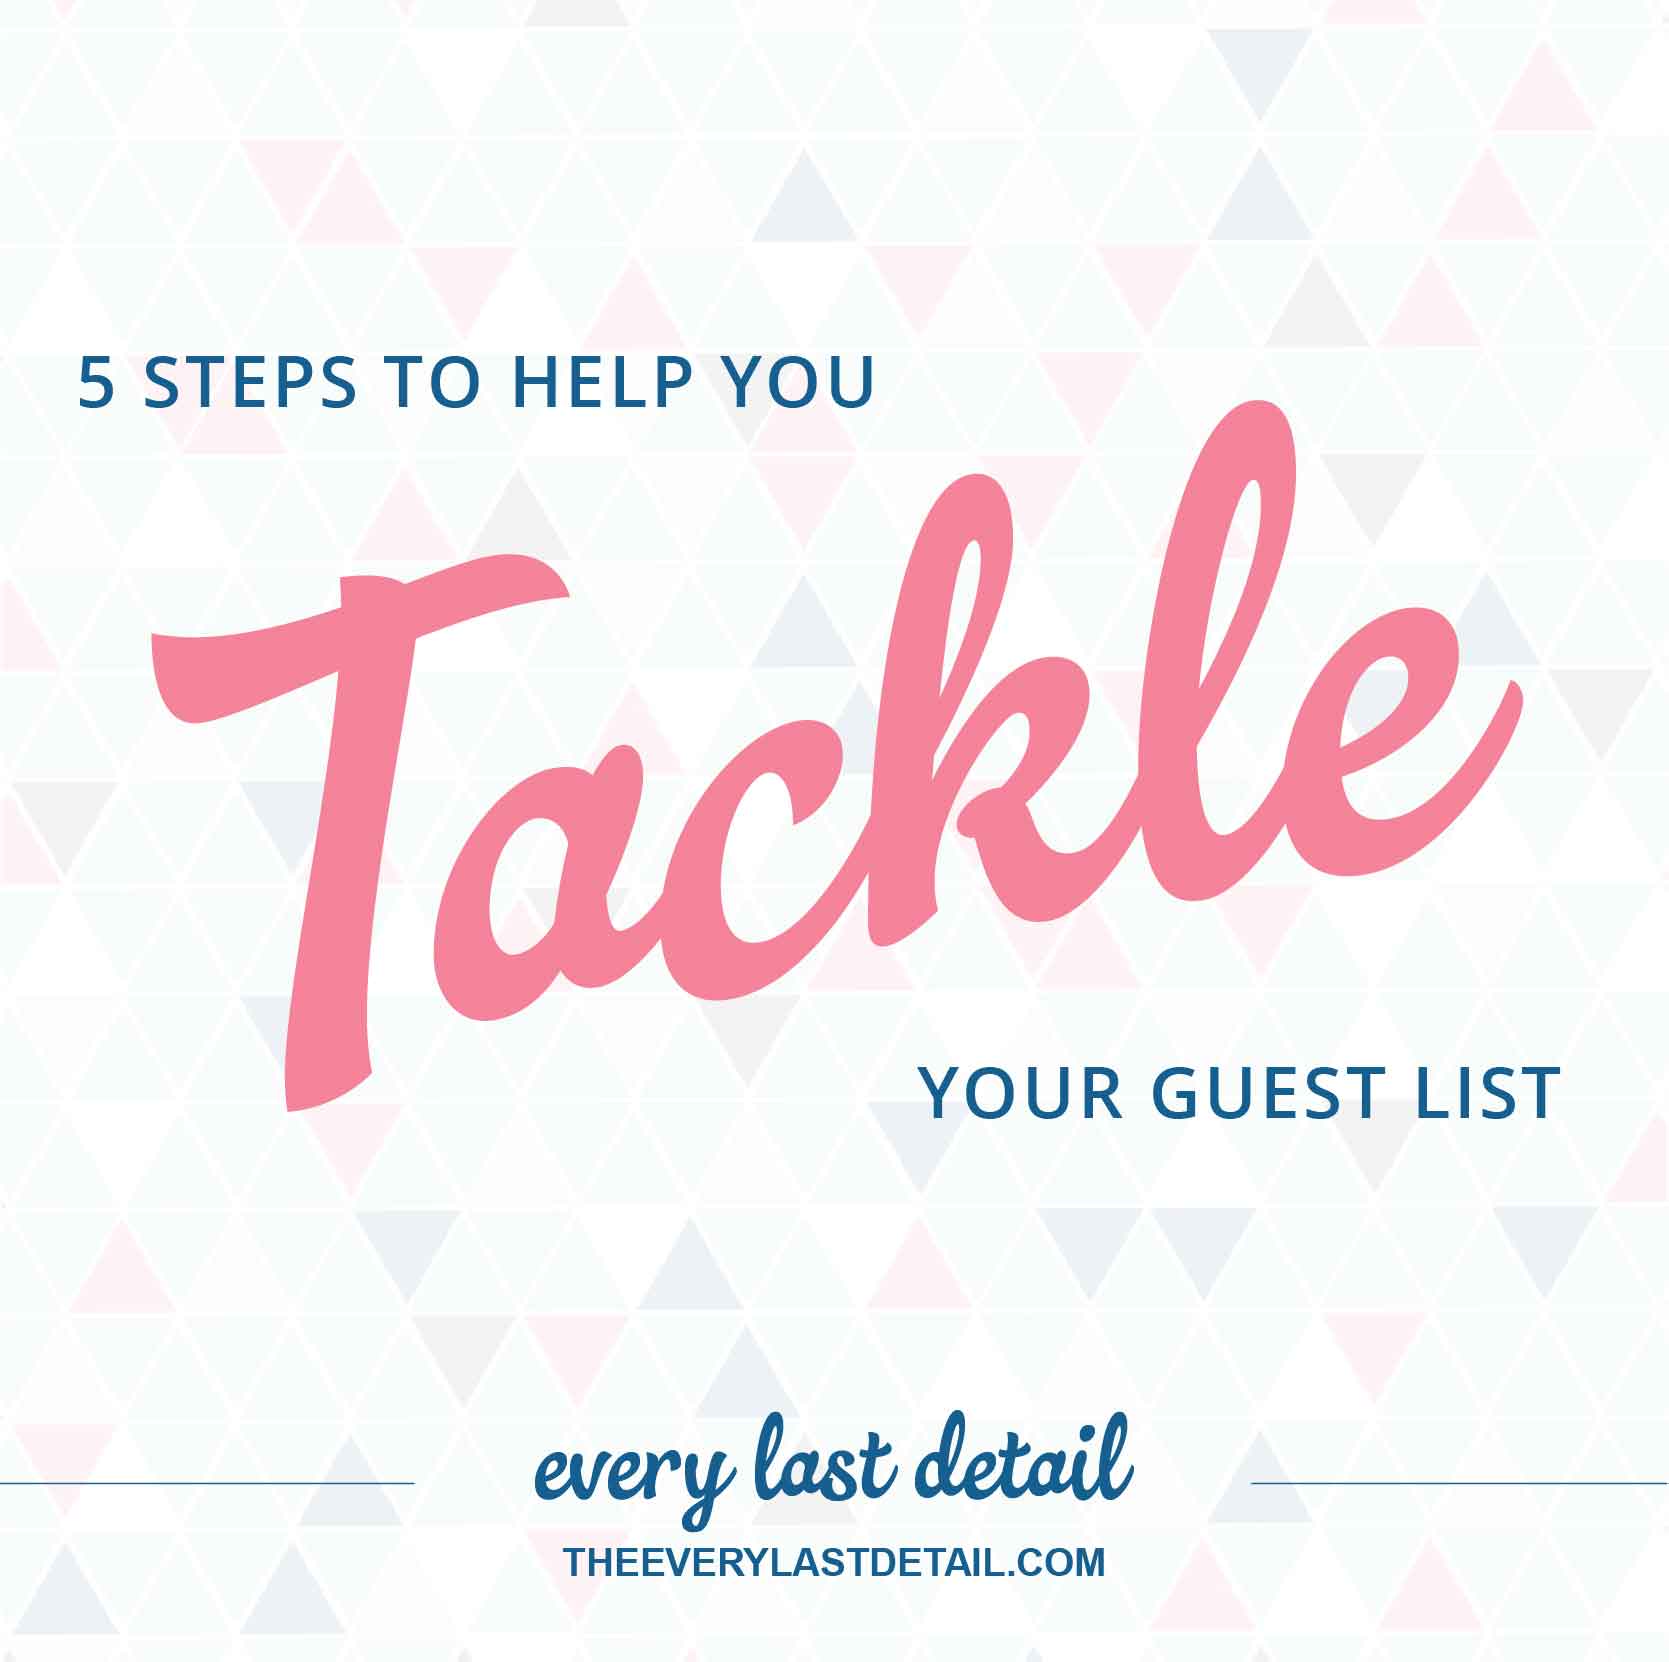 5 Tips To Help You Tackle Your Guest List via TheELD.com